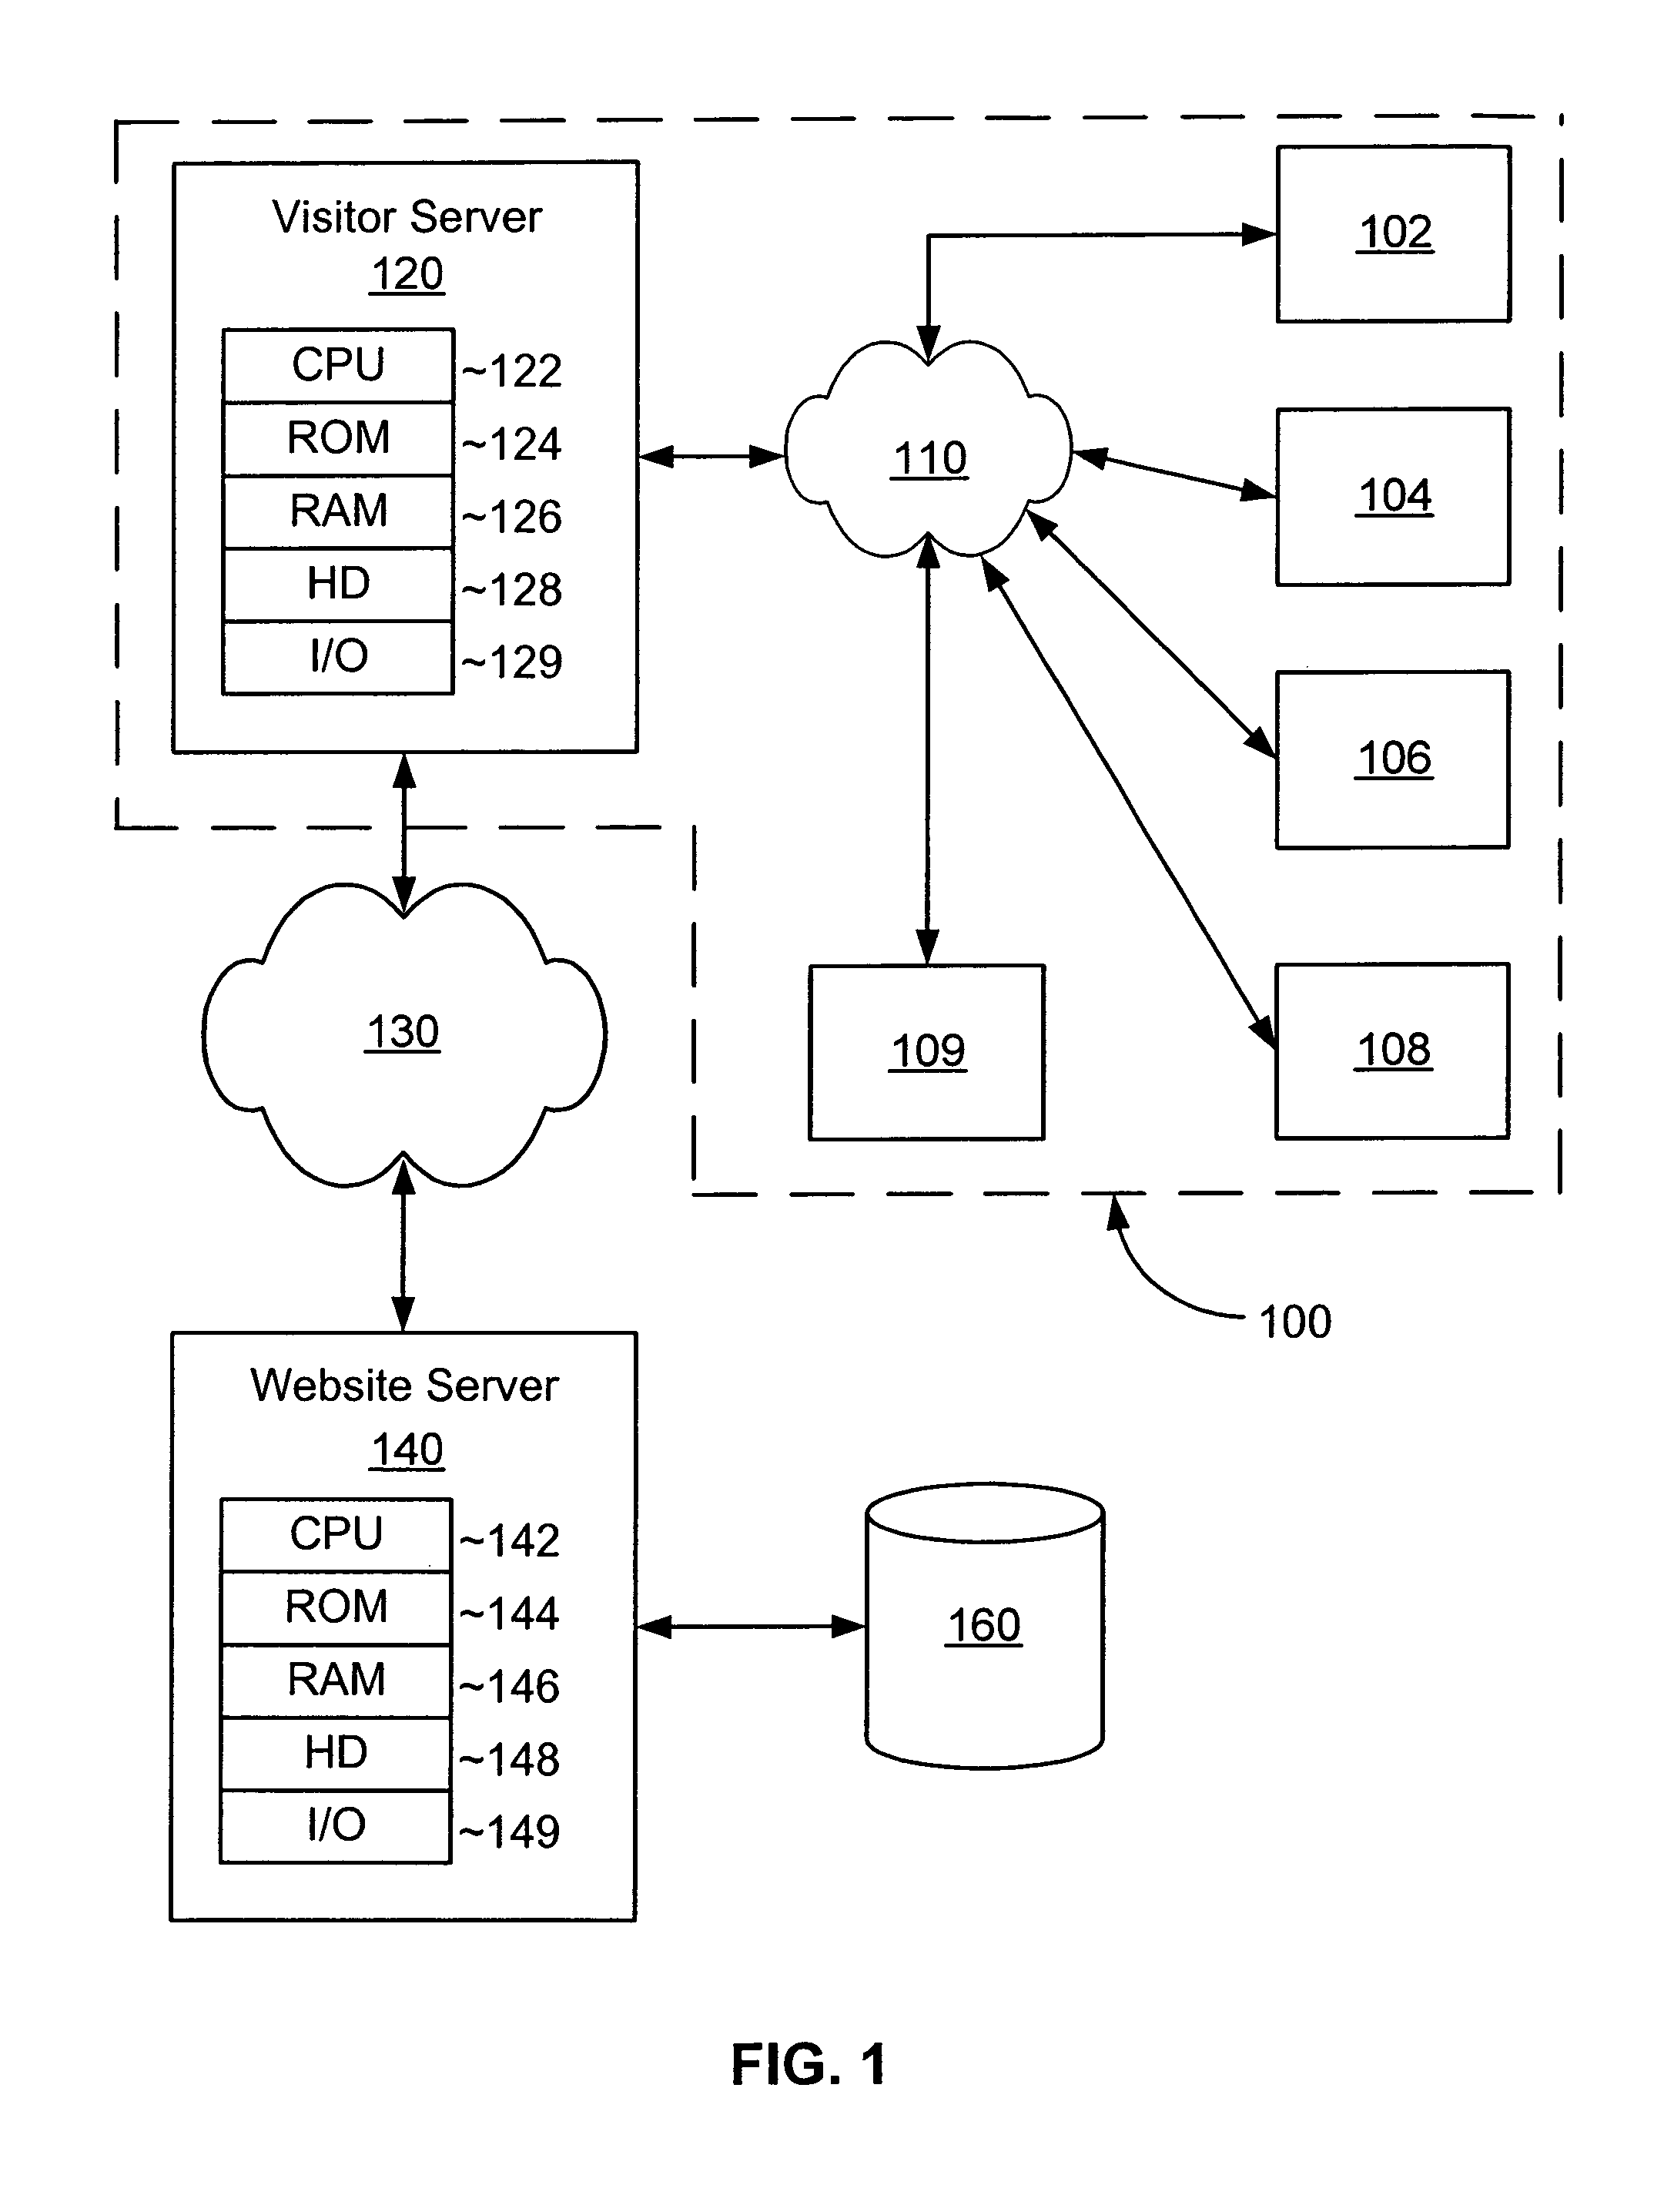 Method and system for identifying a visitor at a website server by requesting additional characteristic of a visitor computer from a visitor server